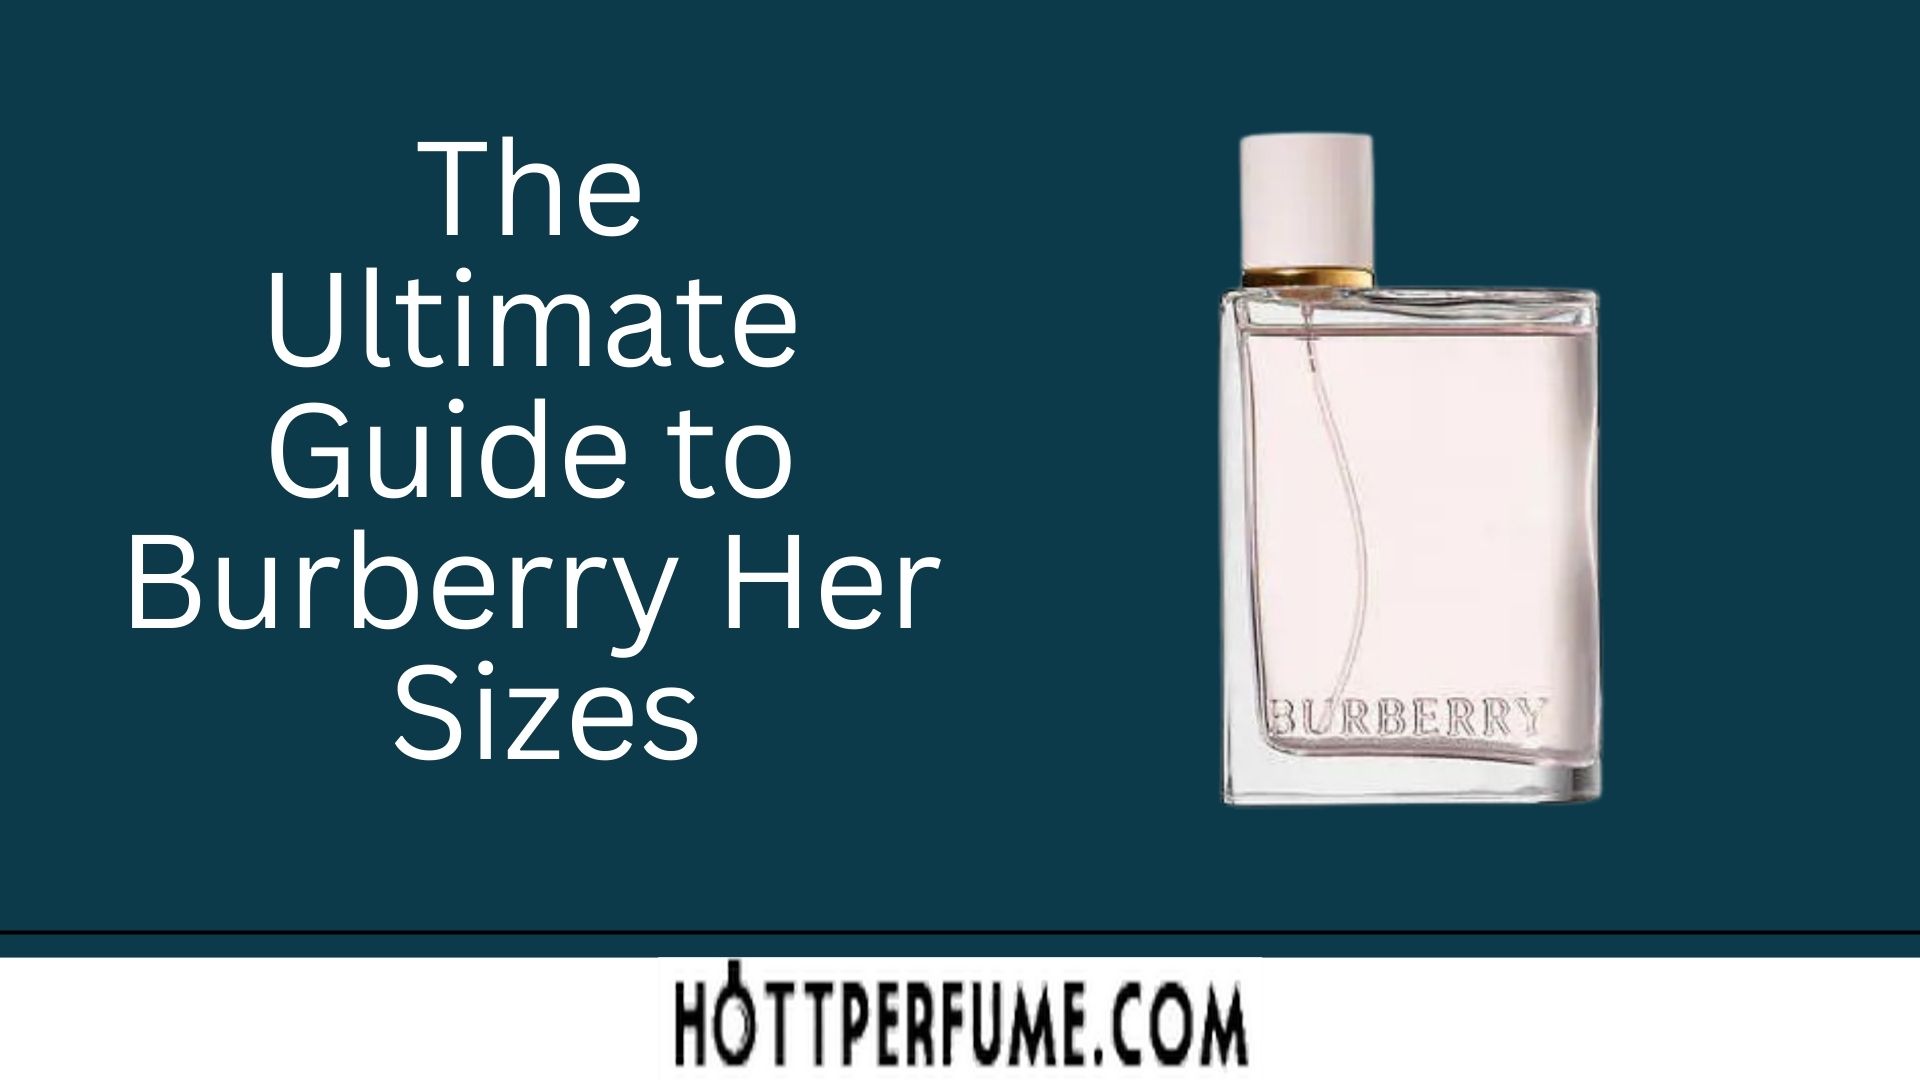 The Ultimate Guide to Burberry Her Sizes